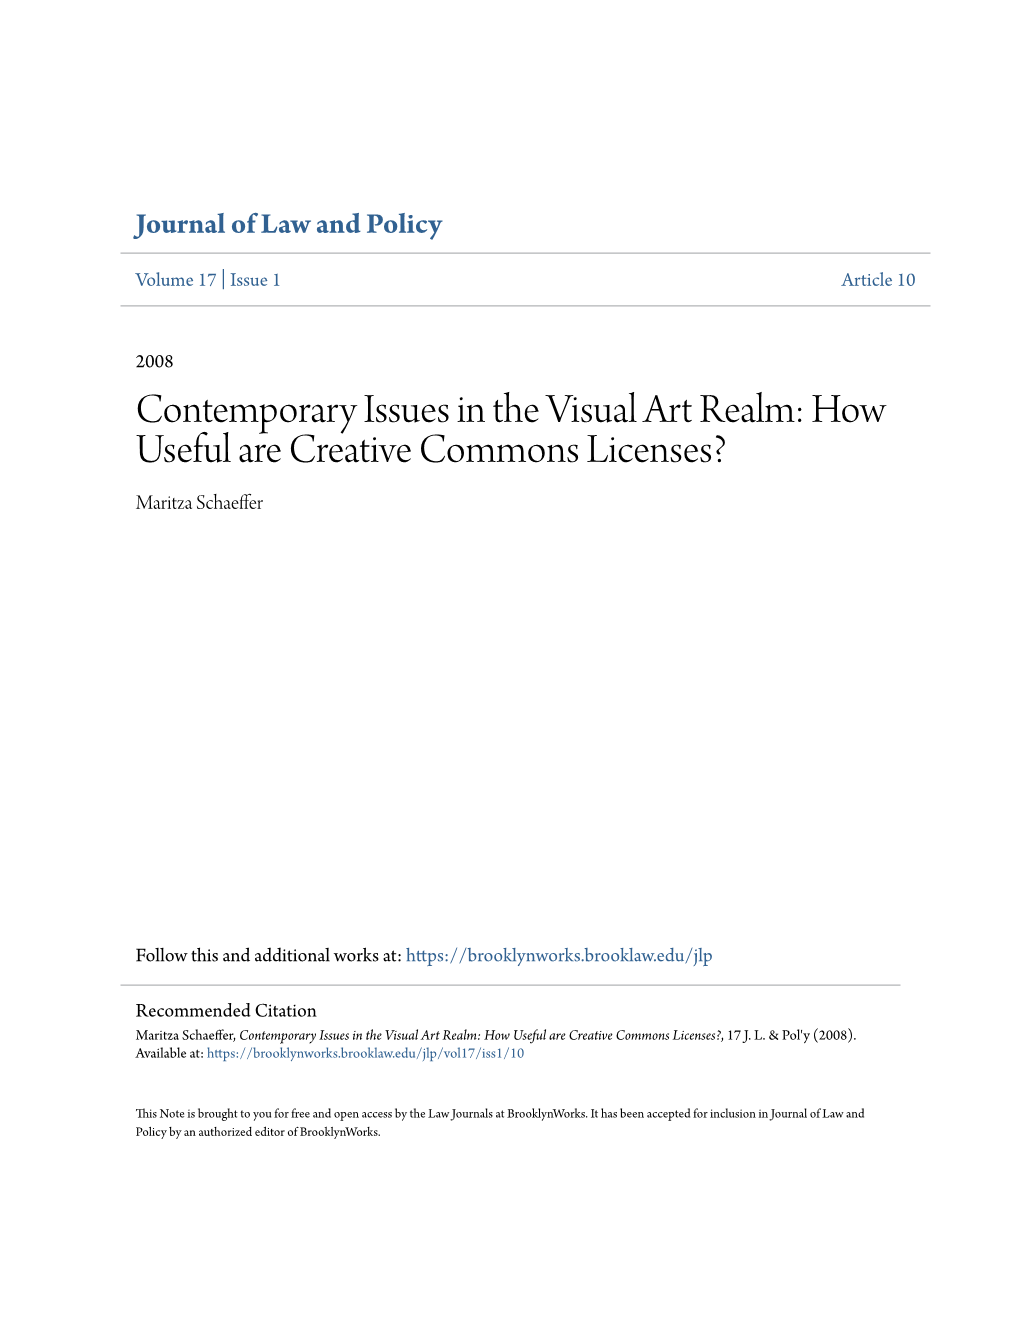 Contemporary Issues in the Visual Art Realm: How Useful Are Creative Commons Licenses? Maritza Schaeffer